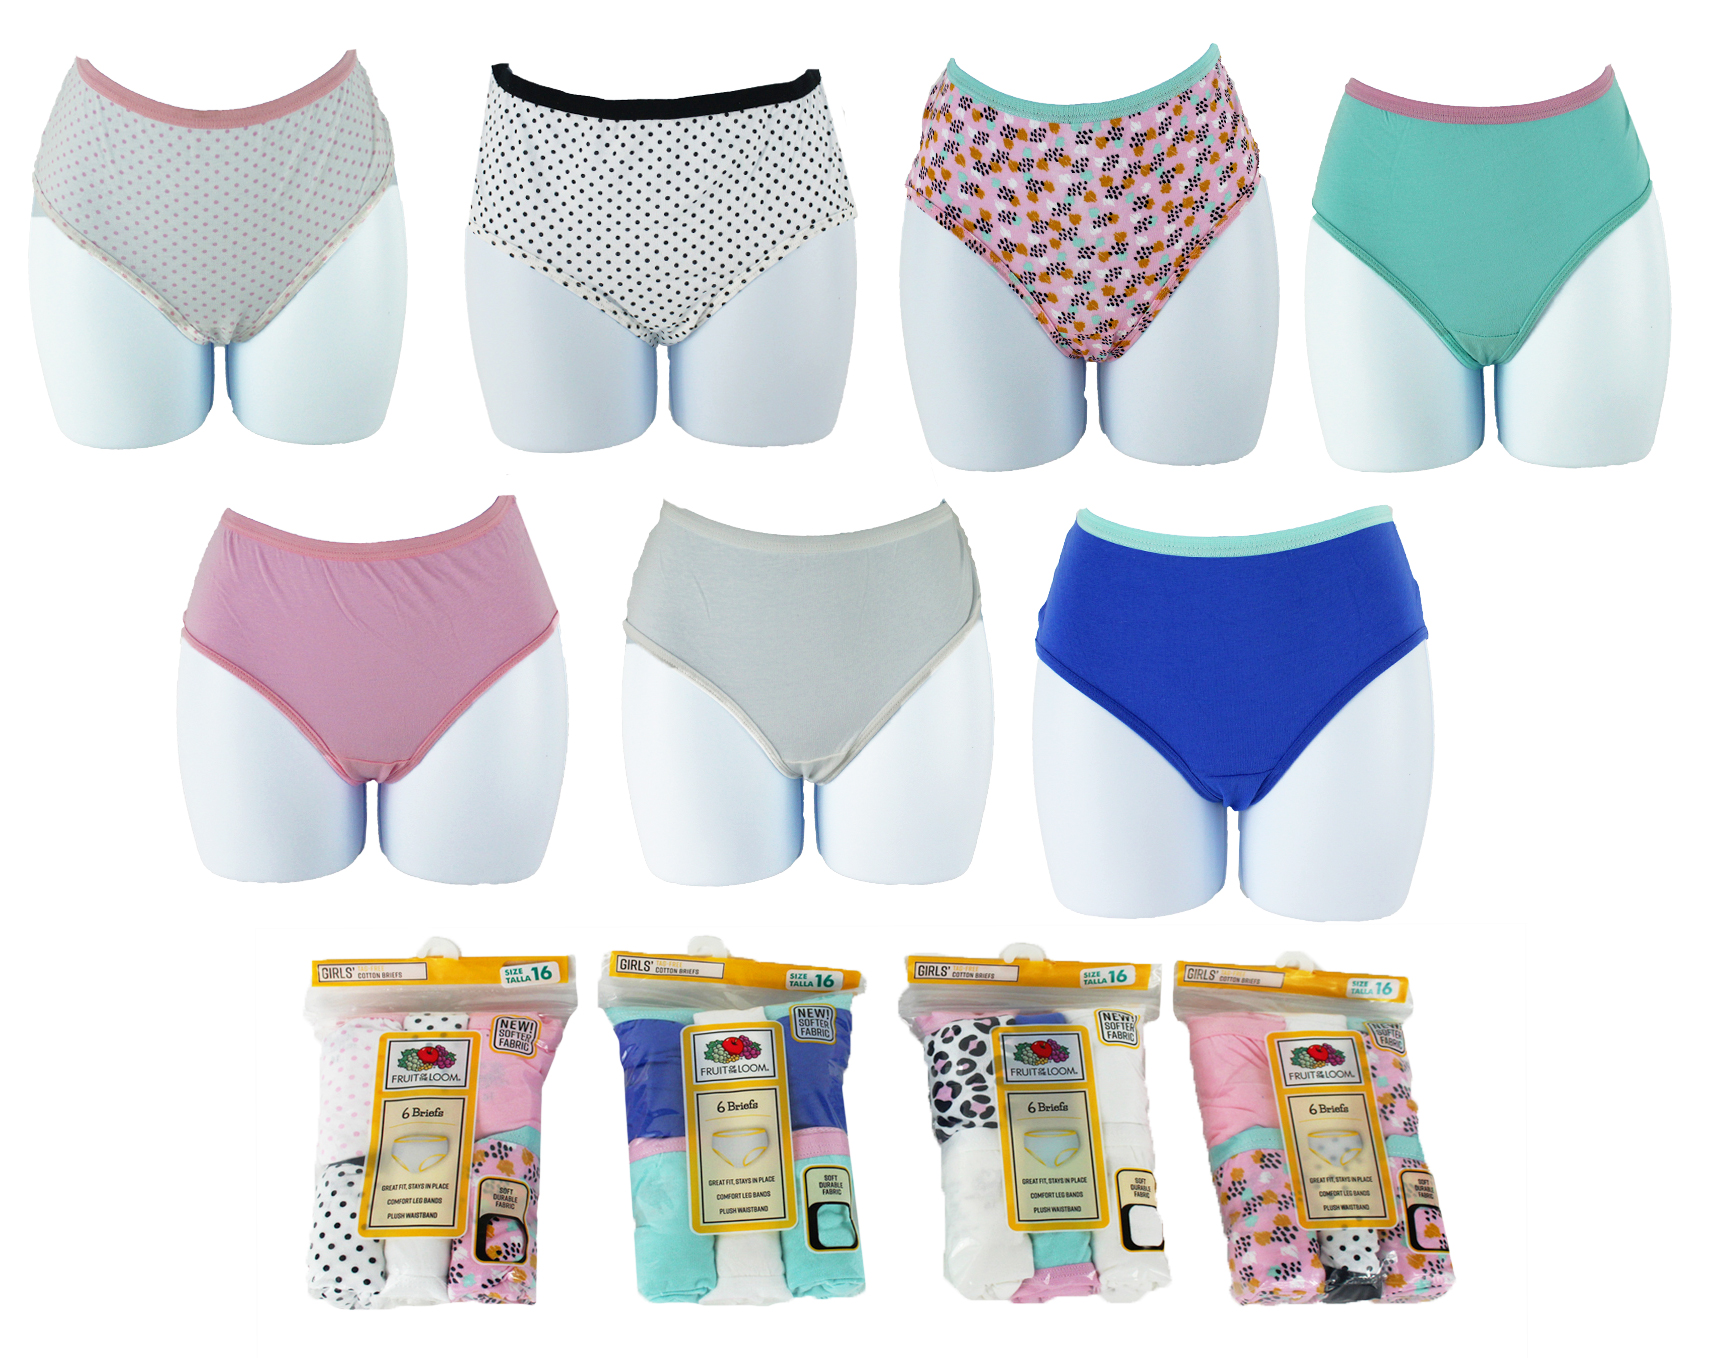 Fruit of the Loom Girl's Brief UNDERWEAR 6-Packs - Sizes 2T/3T - 16